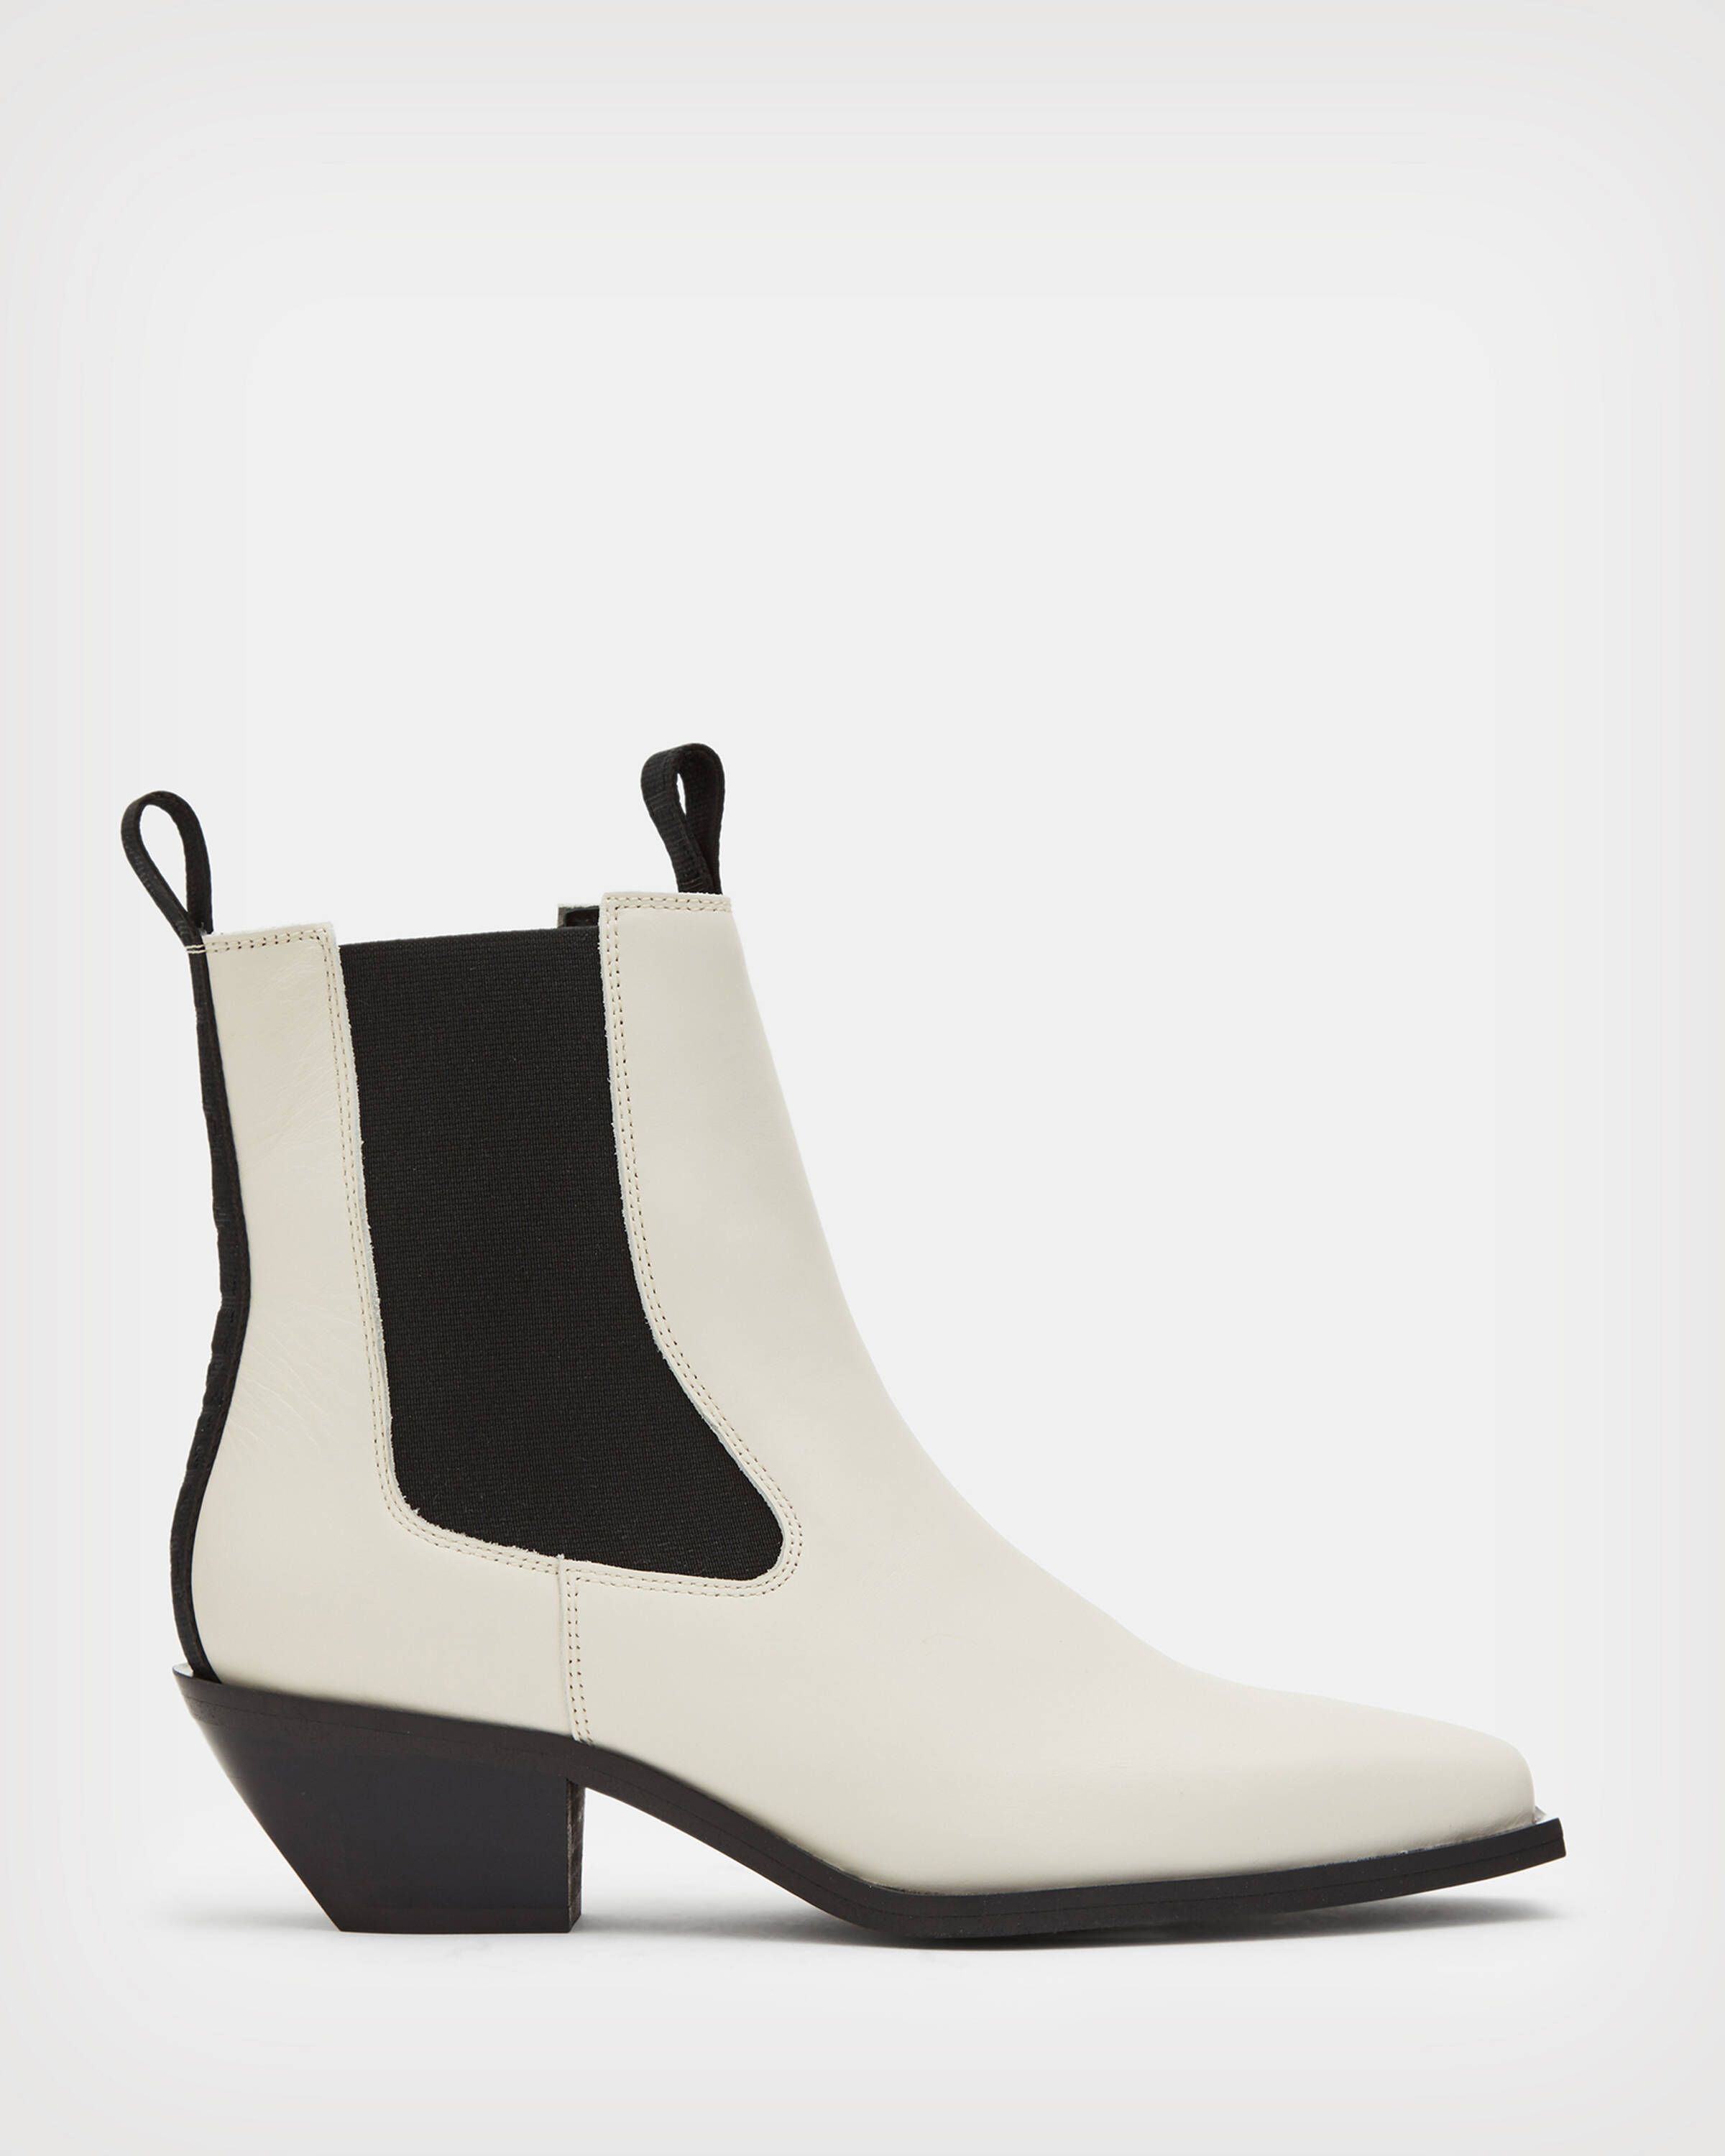 Vally Leather Boots | AllSaints UK